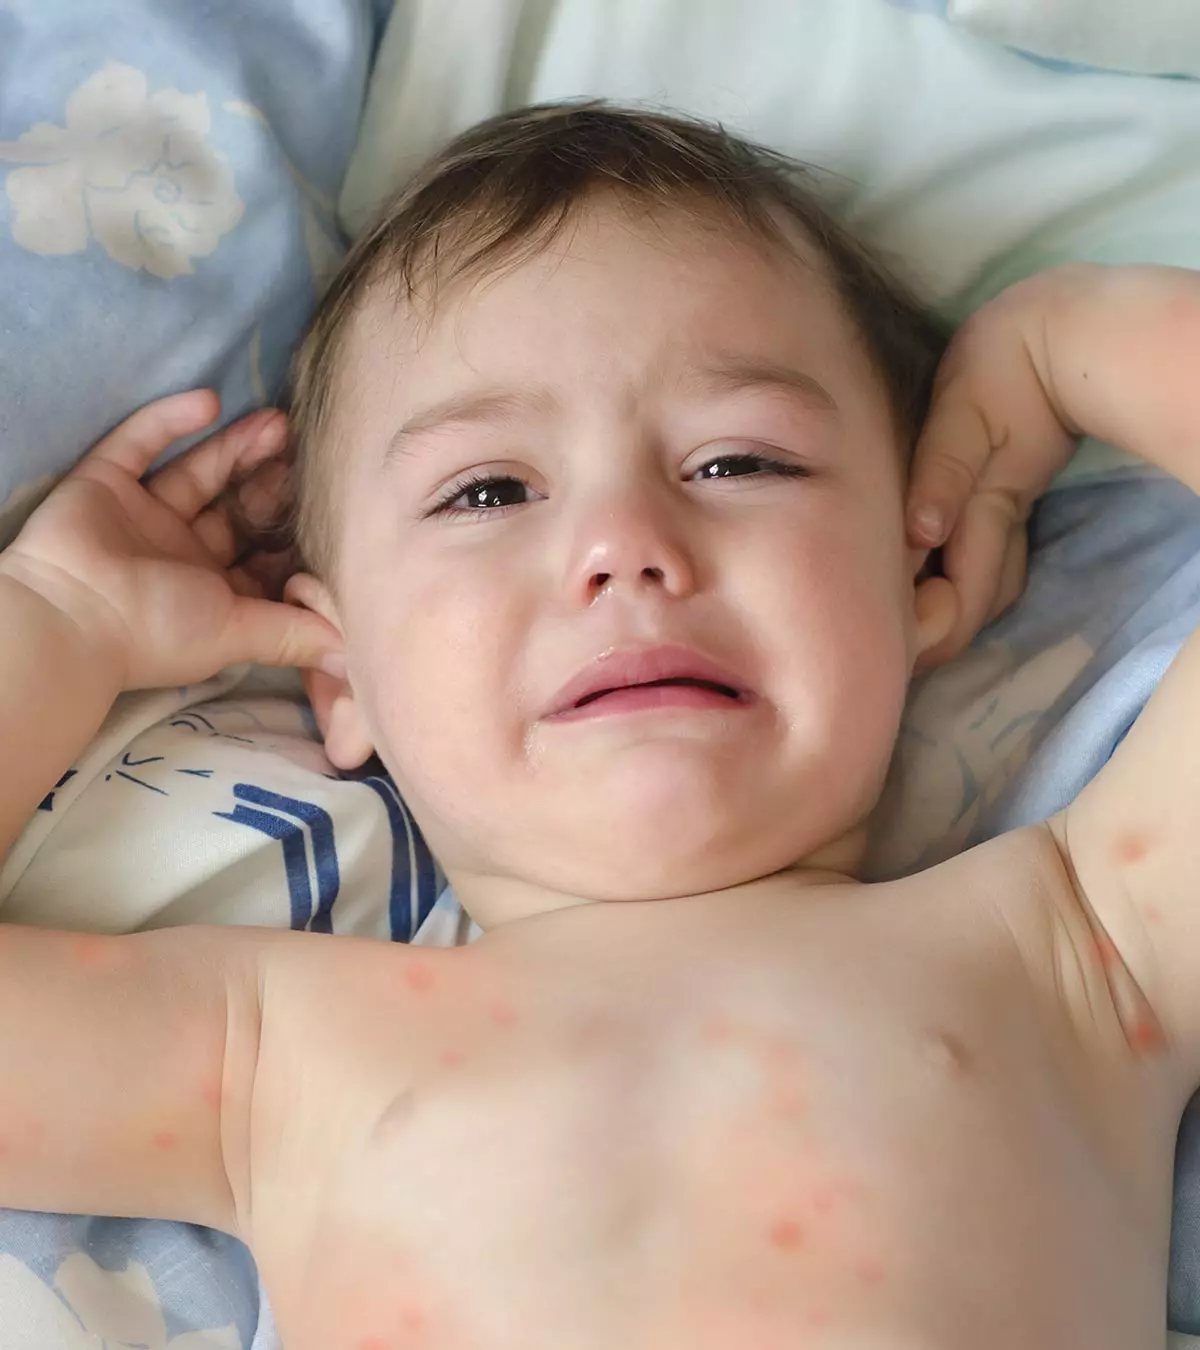 Spider Bites In Toddlers - Causes, Symptoms & Treatments